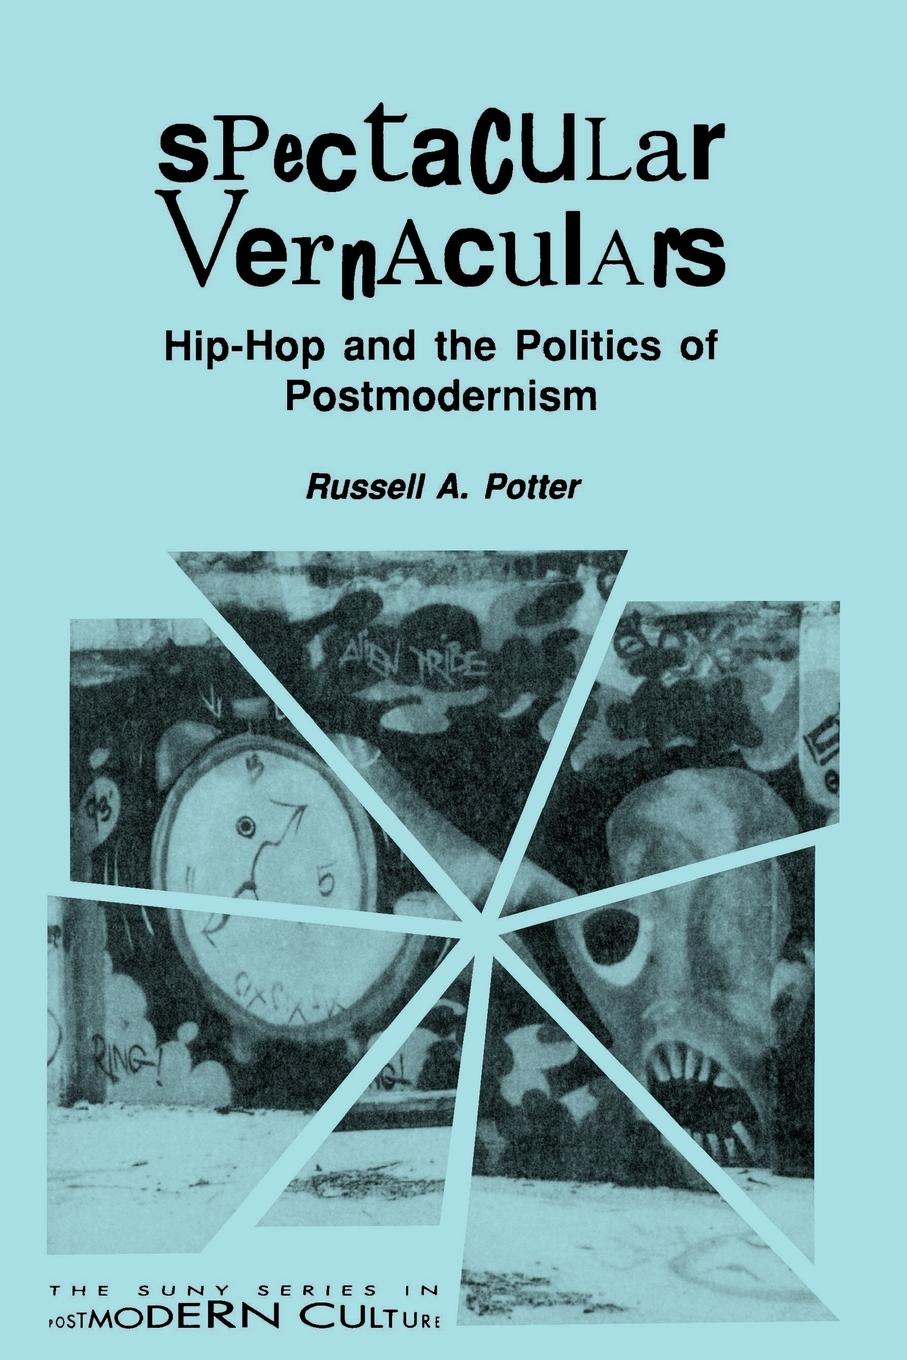 Spectacular Vernaculars / Hip-Hop and the Politics of Postmodernism / Russell A. Potter / Taschenbuch / Paperback / Englisch / 1995 / SUNY Press / EAN 9780791426265 - Potter, Russell A.